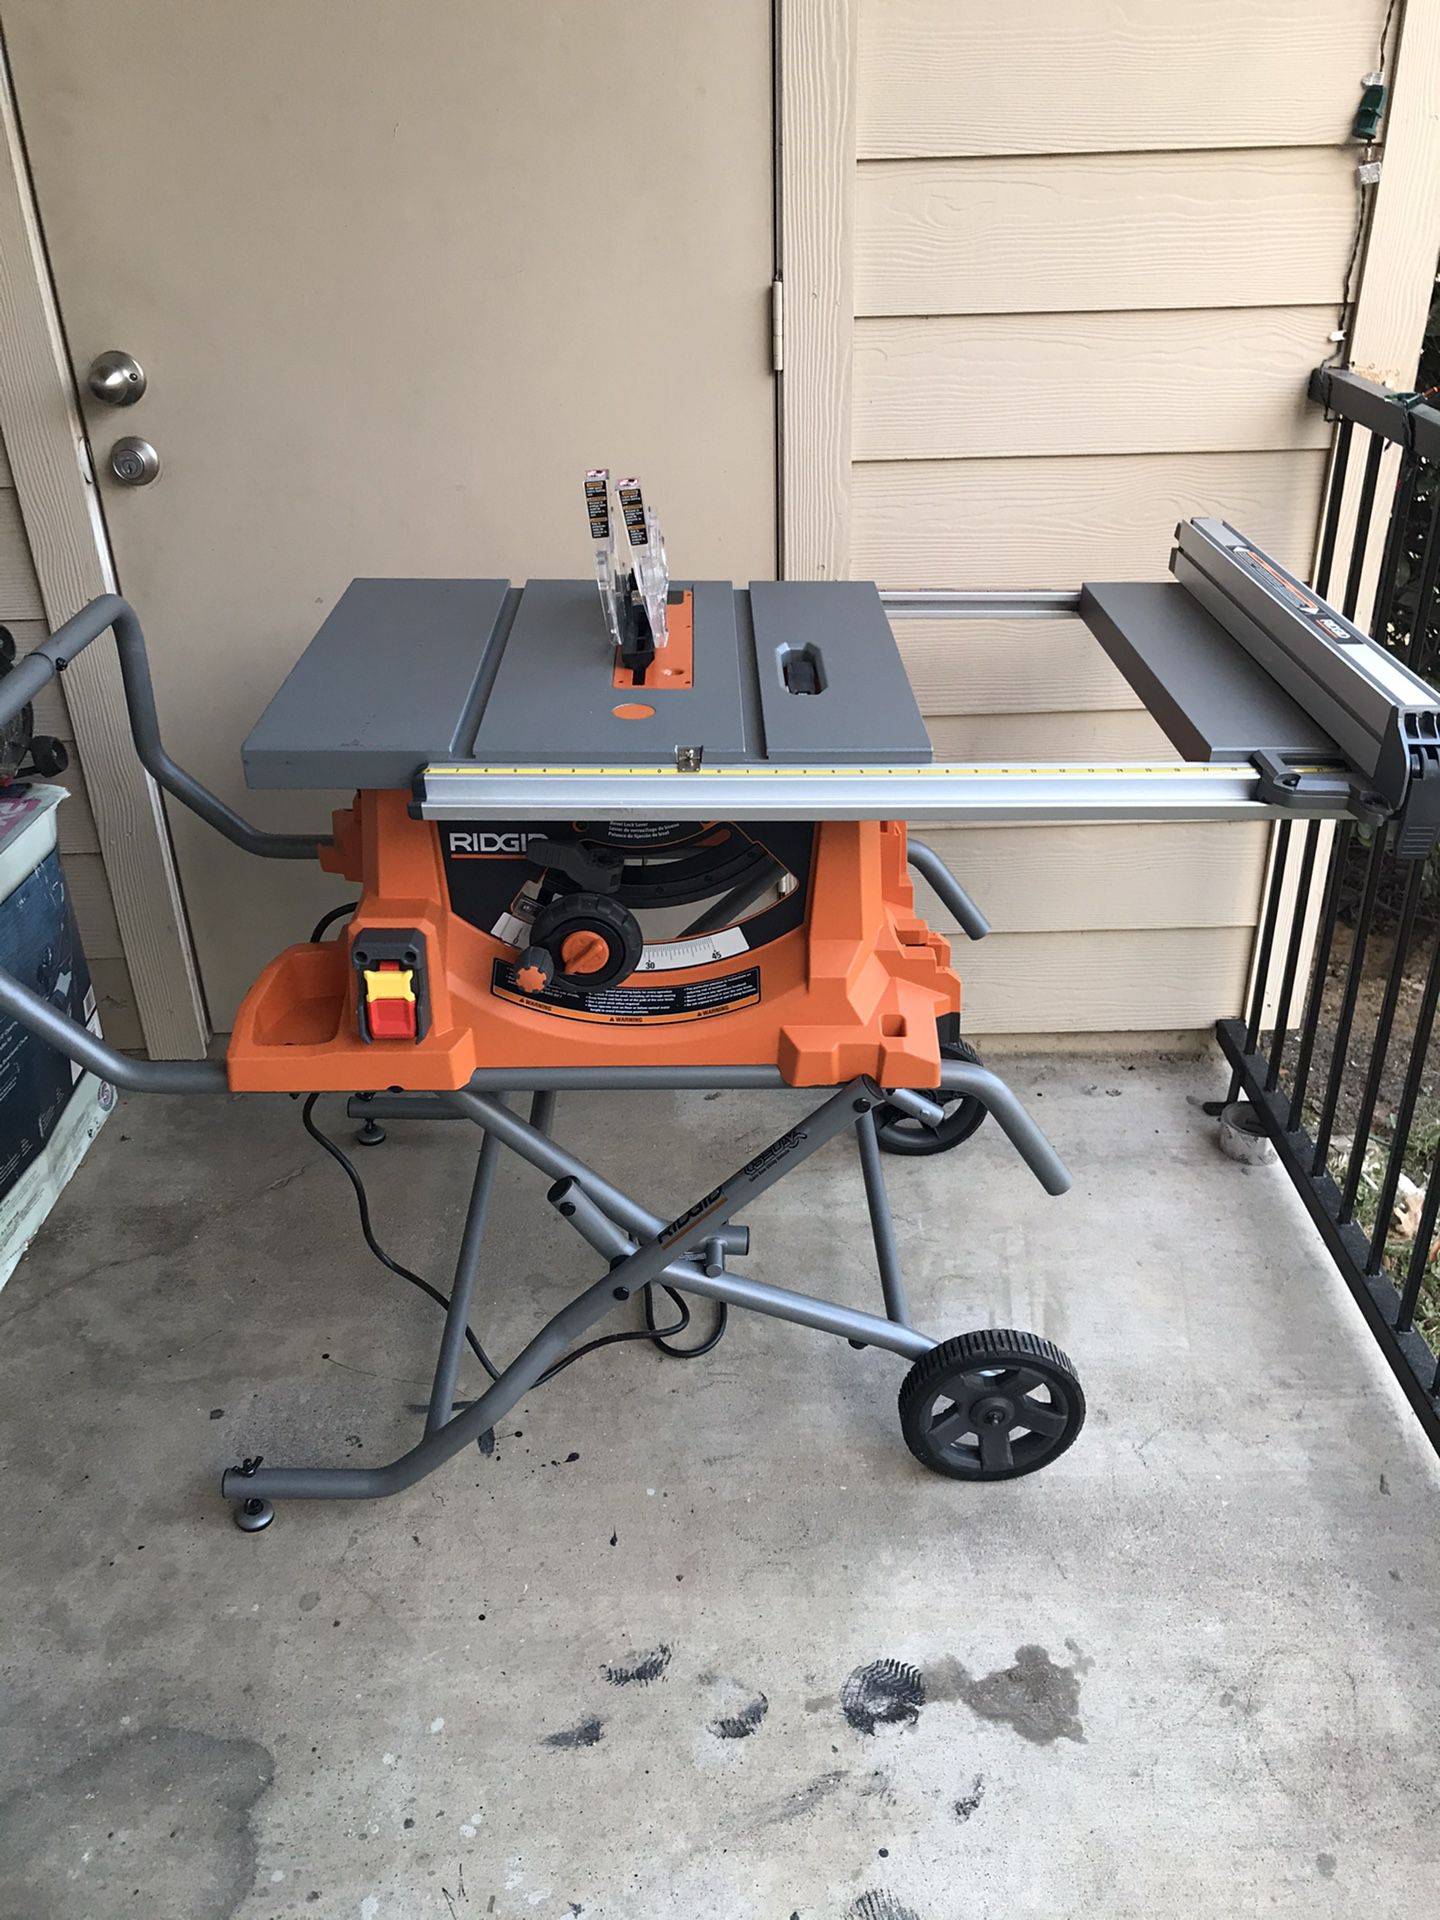 Heavy duty 10” portable table saw with stand